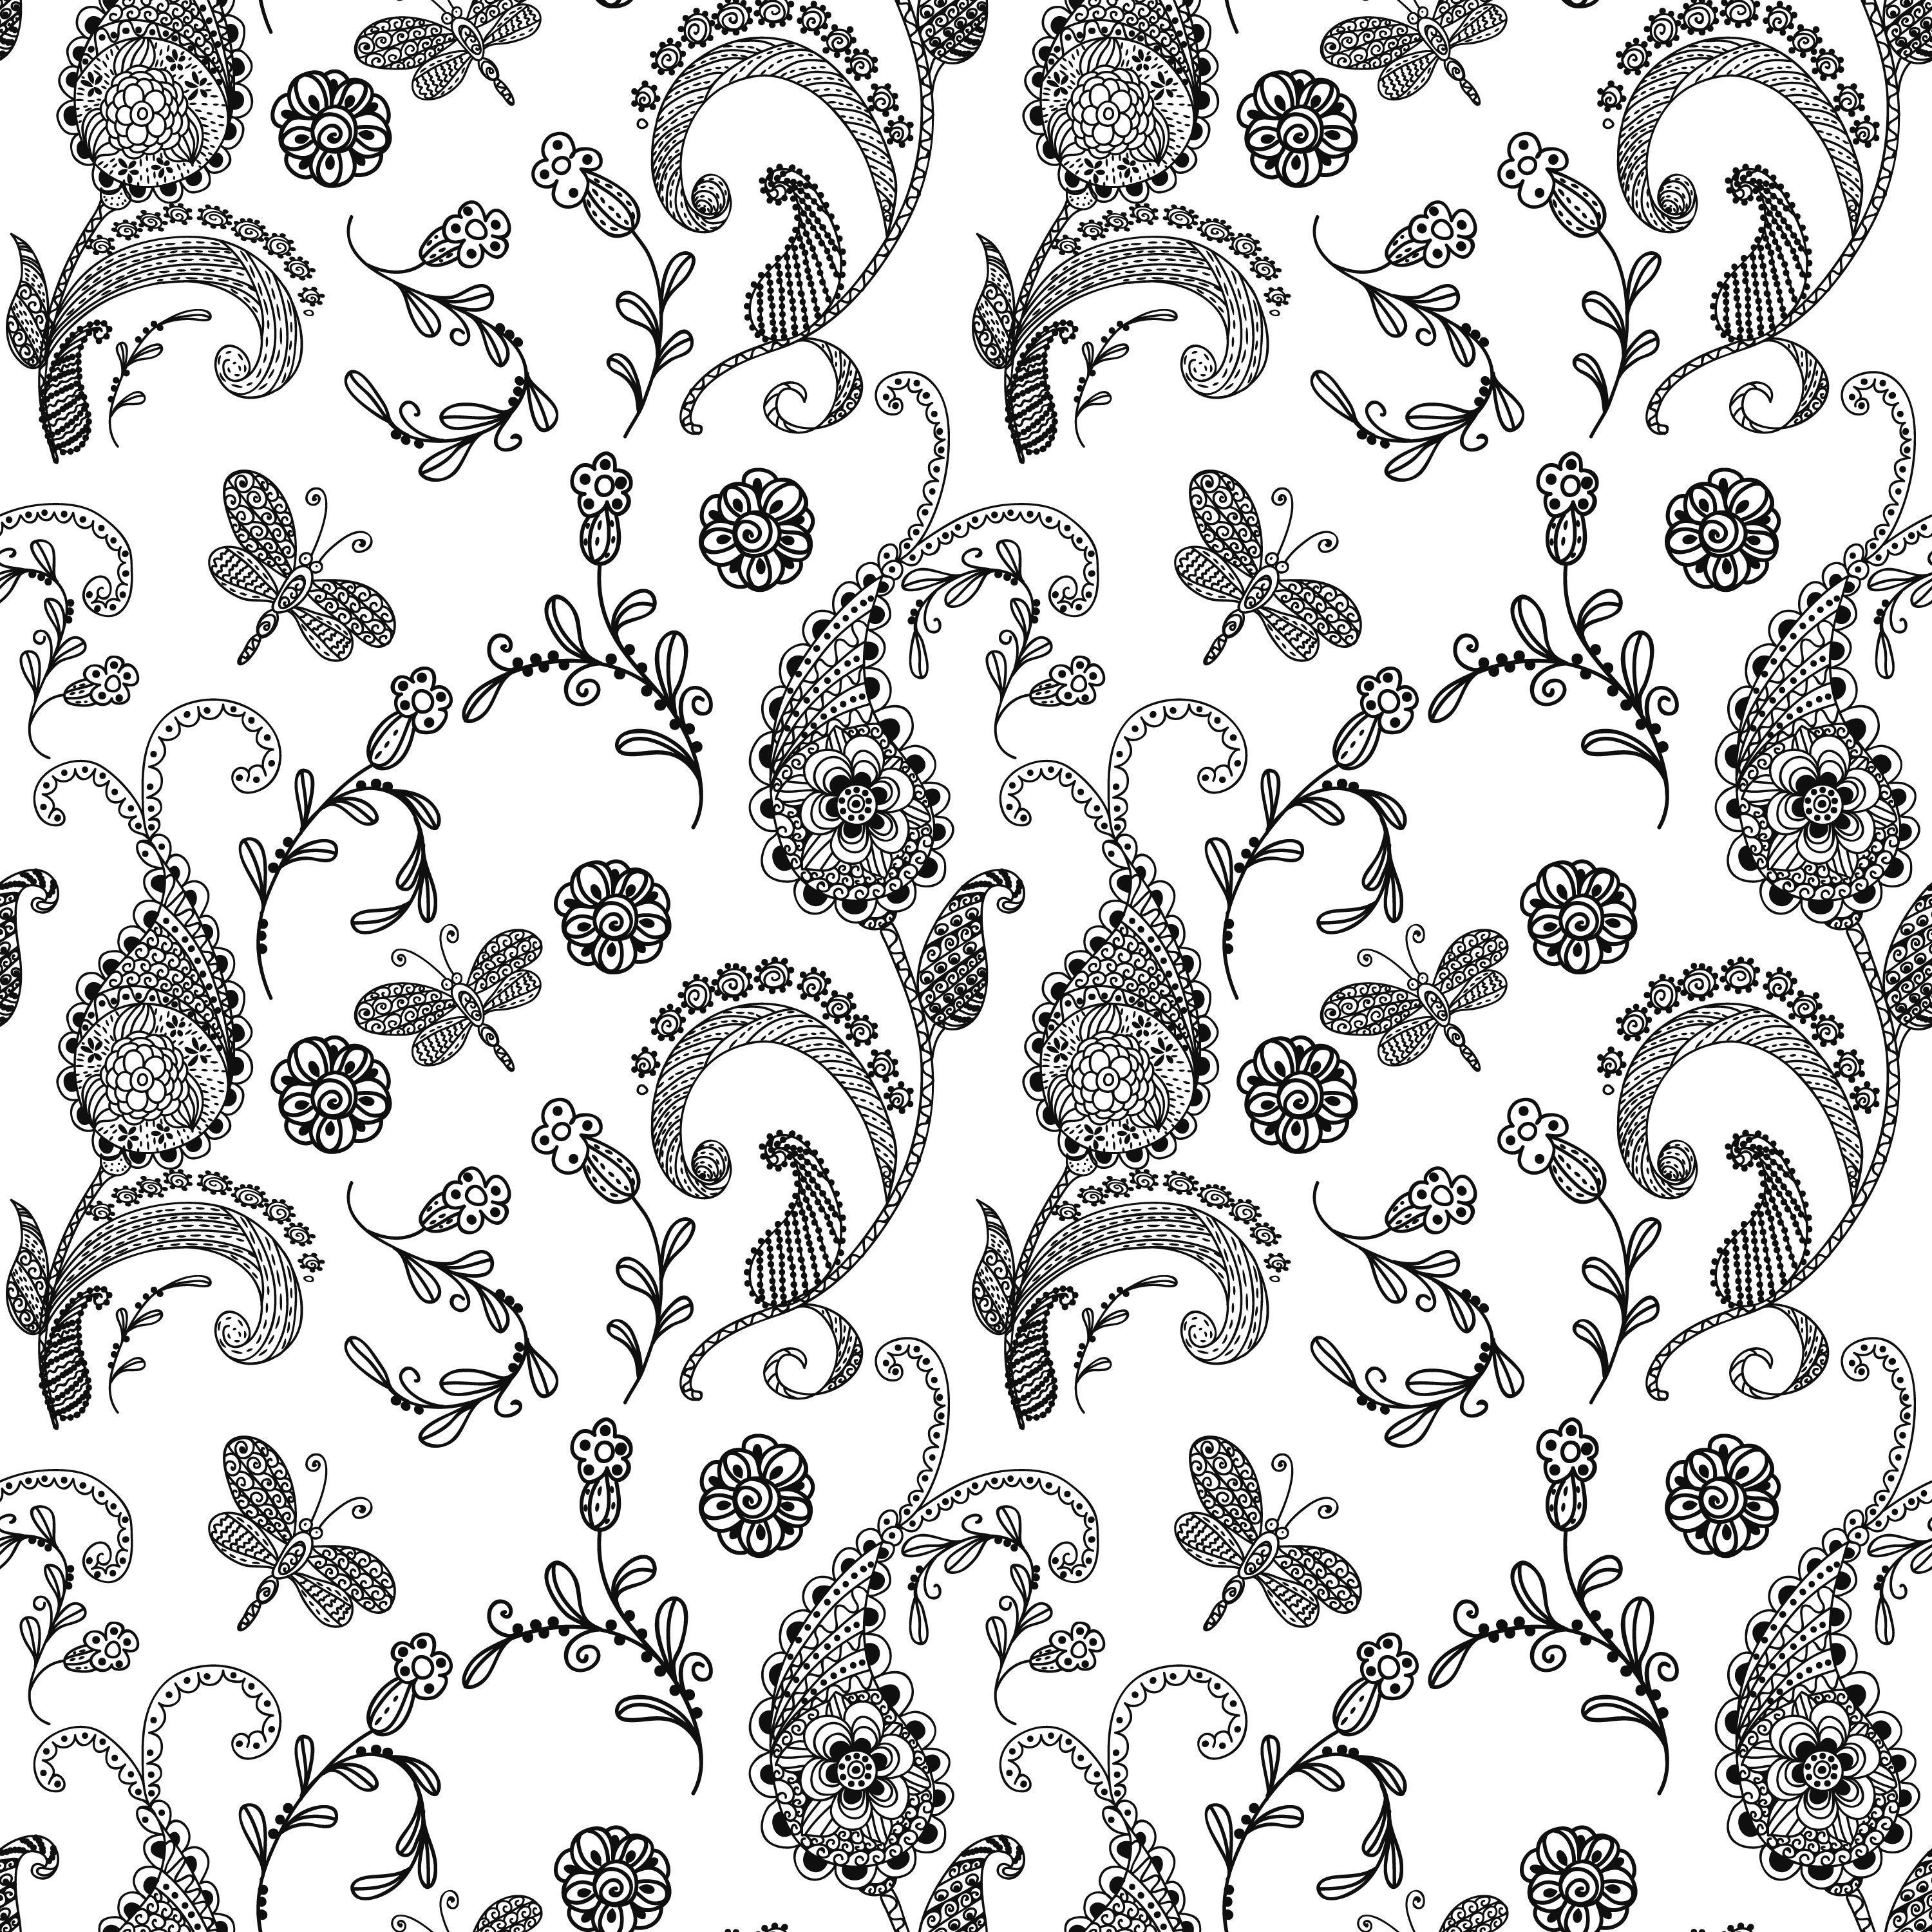 Paisley Embroidery Patterns Motif Cachemire Dessin Einzigartig Cashmere Embroidery Patterns